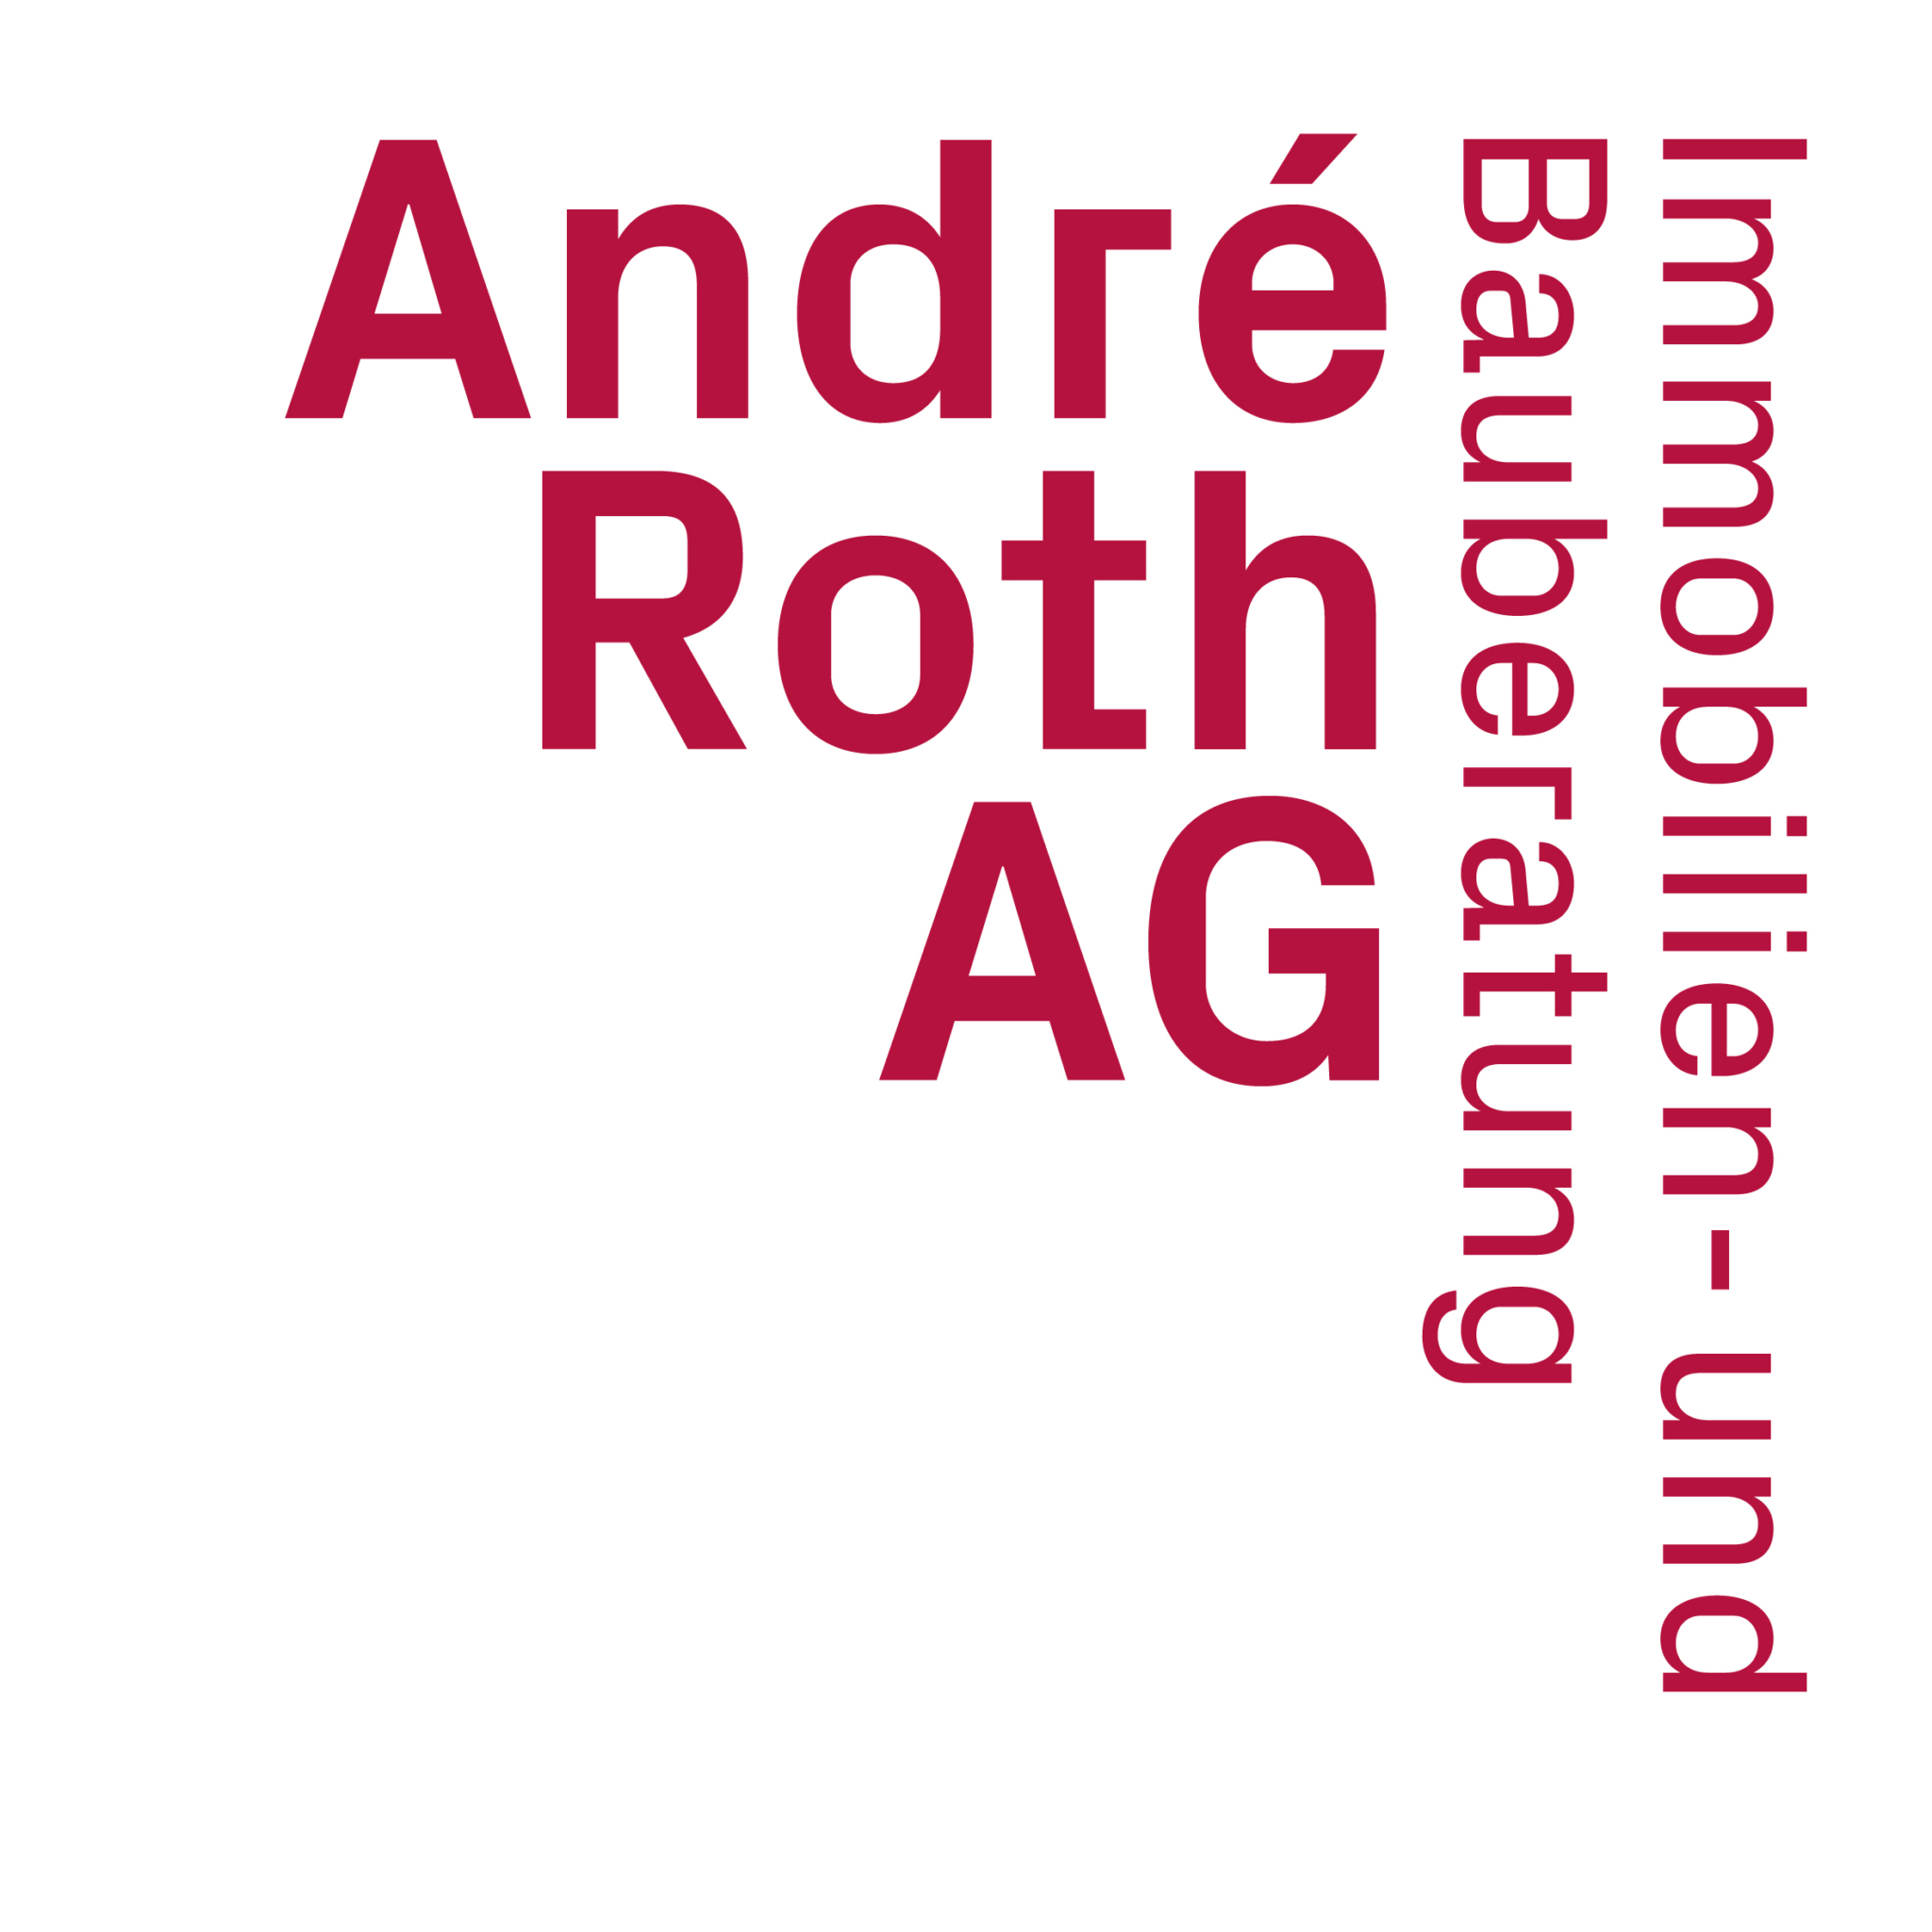 André Roth AG Immobilien- und Bauberatung